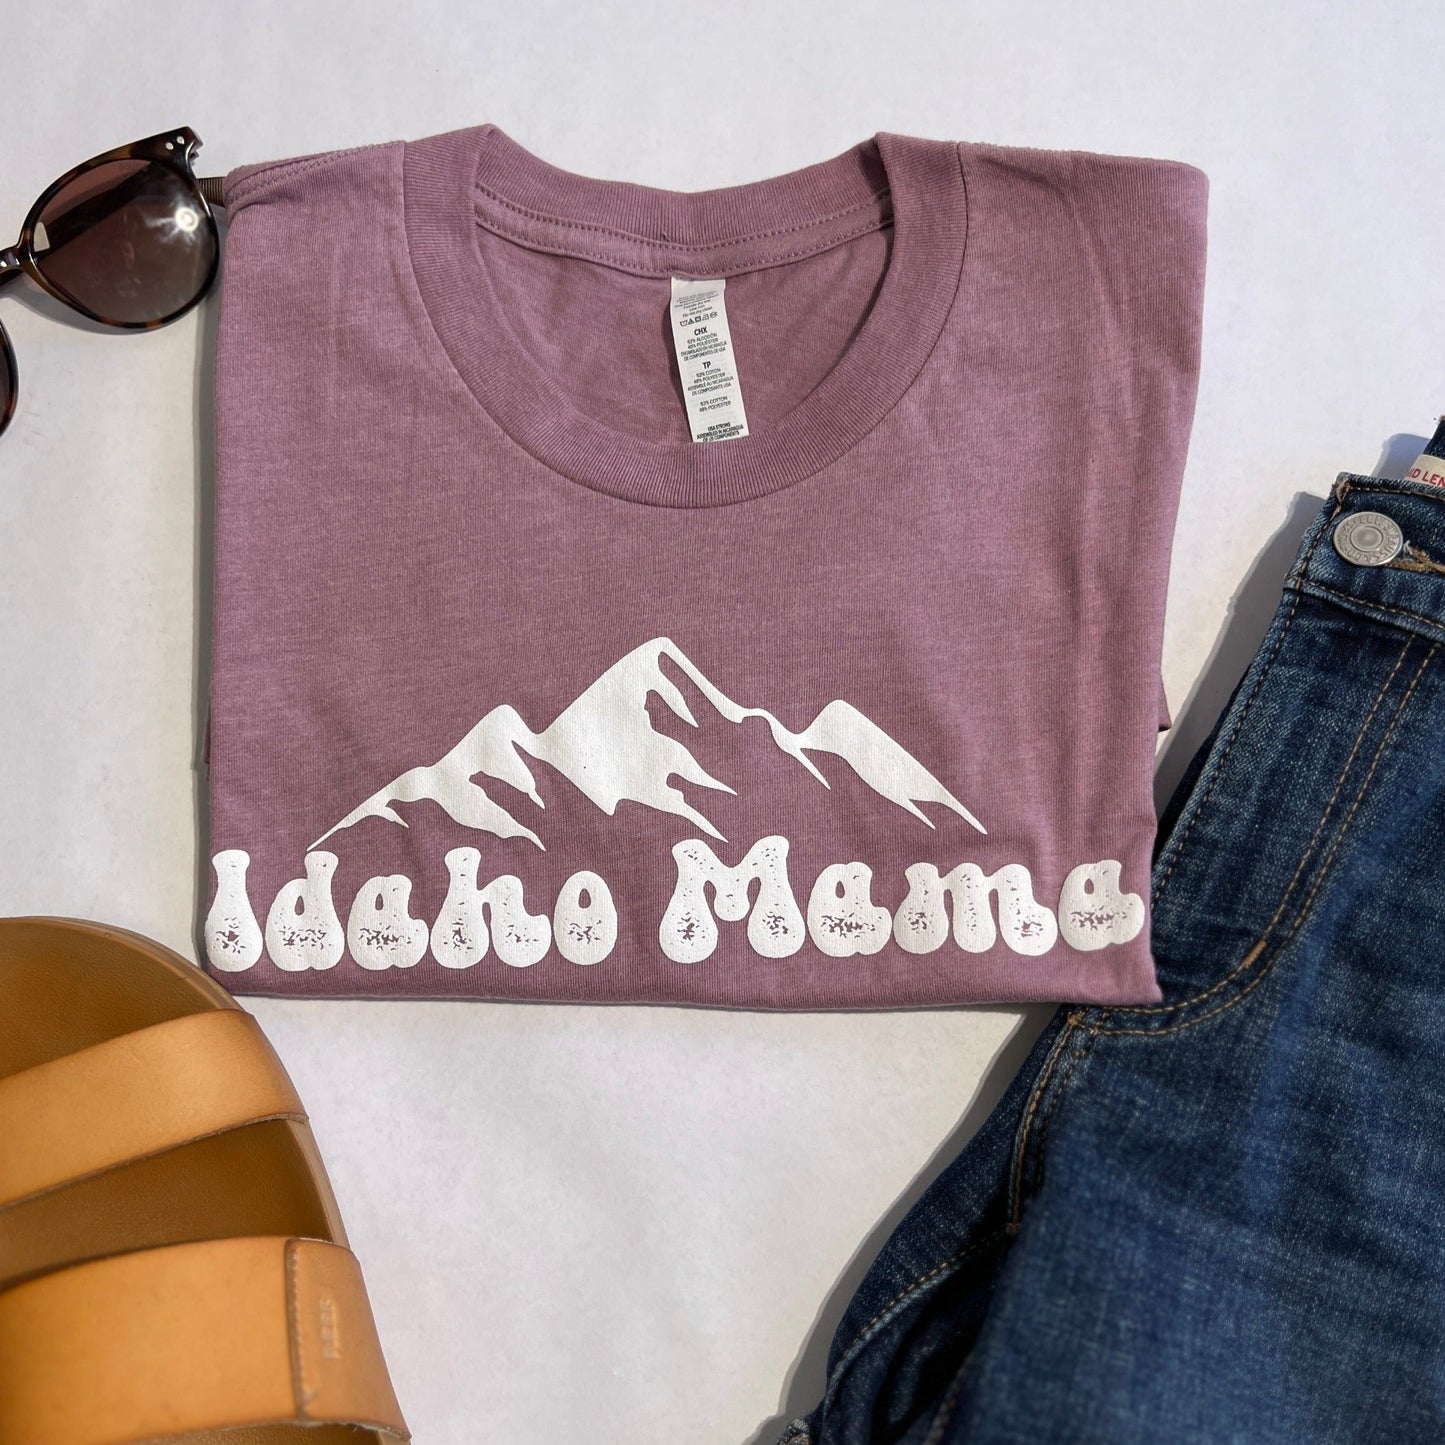 Idaho Mama shirt in Sage green. This cute Idaho Mama shirt is a cute style that can be dressed up or down. This t shirt is designed right here in Idaho by an Idaho Apparel Company. This Idaho T Shirt showcases the adventure an Idaho pride. The letters on the Idaho T shirt say Idaho Mama. Idaho T Shirt in Purple